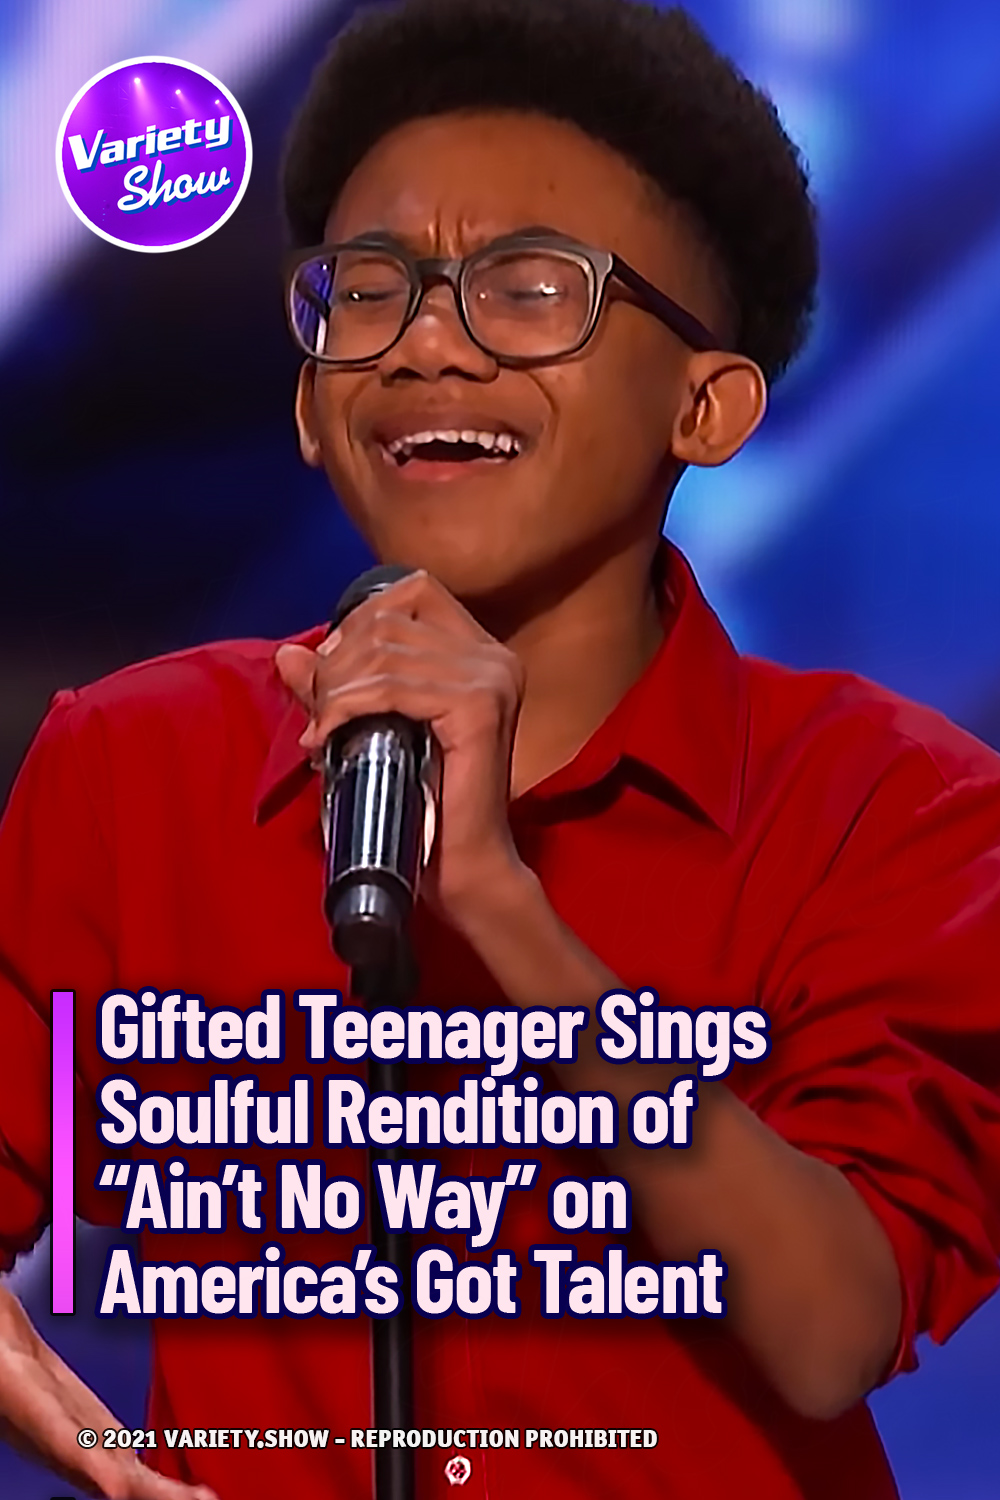 Gifted Teenager Sings Soulful Rendition of “Ain’t No Way” on America’s Got Talent